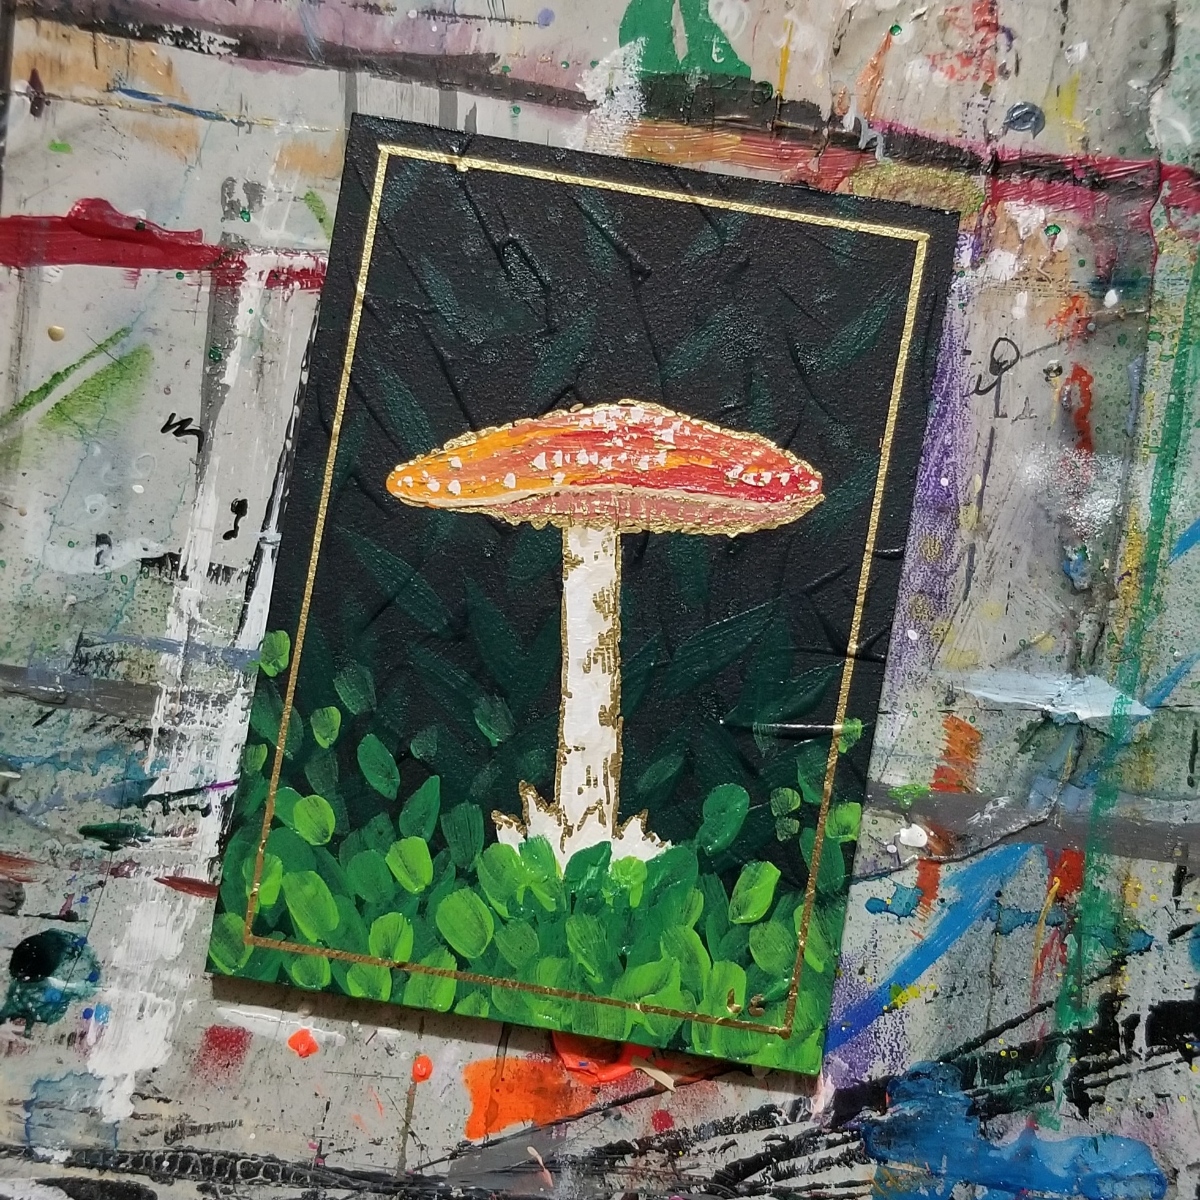 Tiny Amanita Muscaria by Laura Coffee